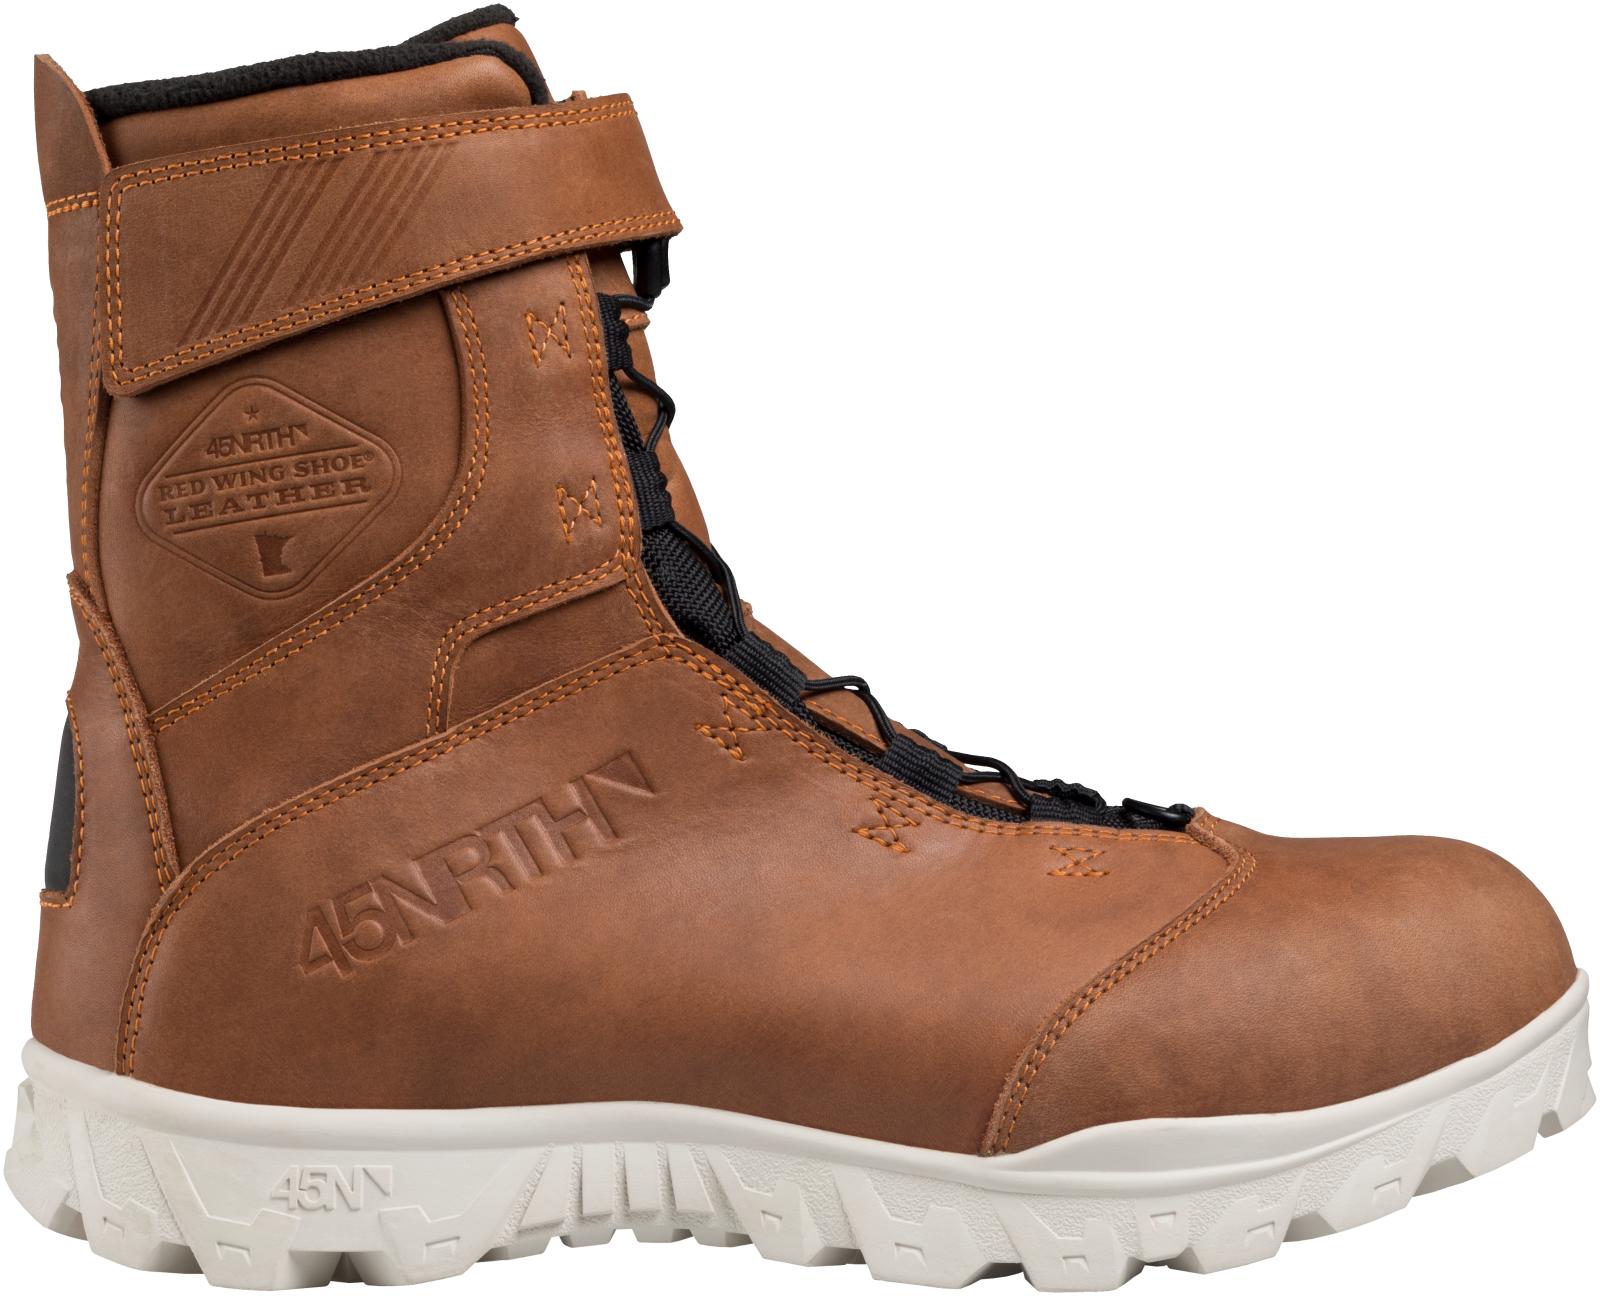 45NRTH Red Wing Limited Edition 